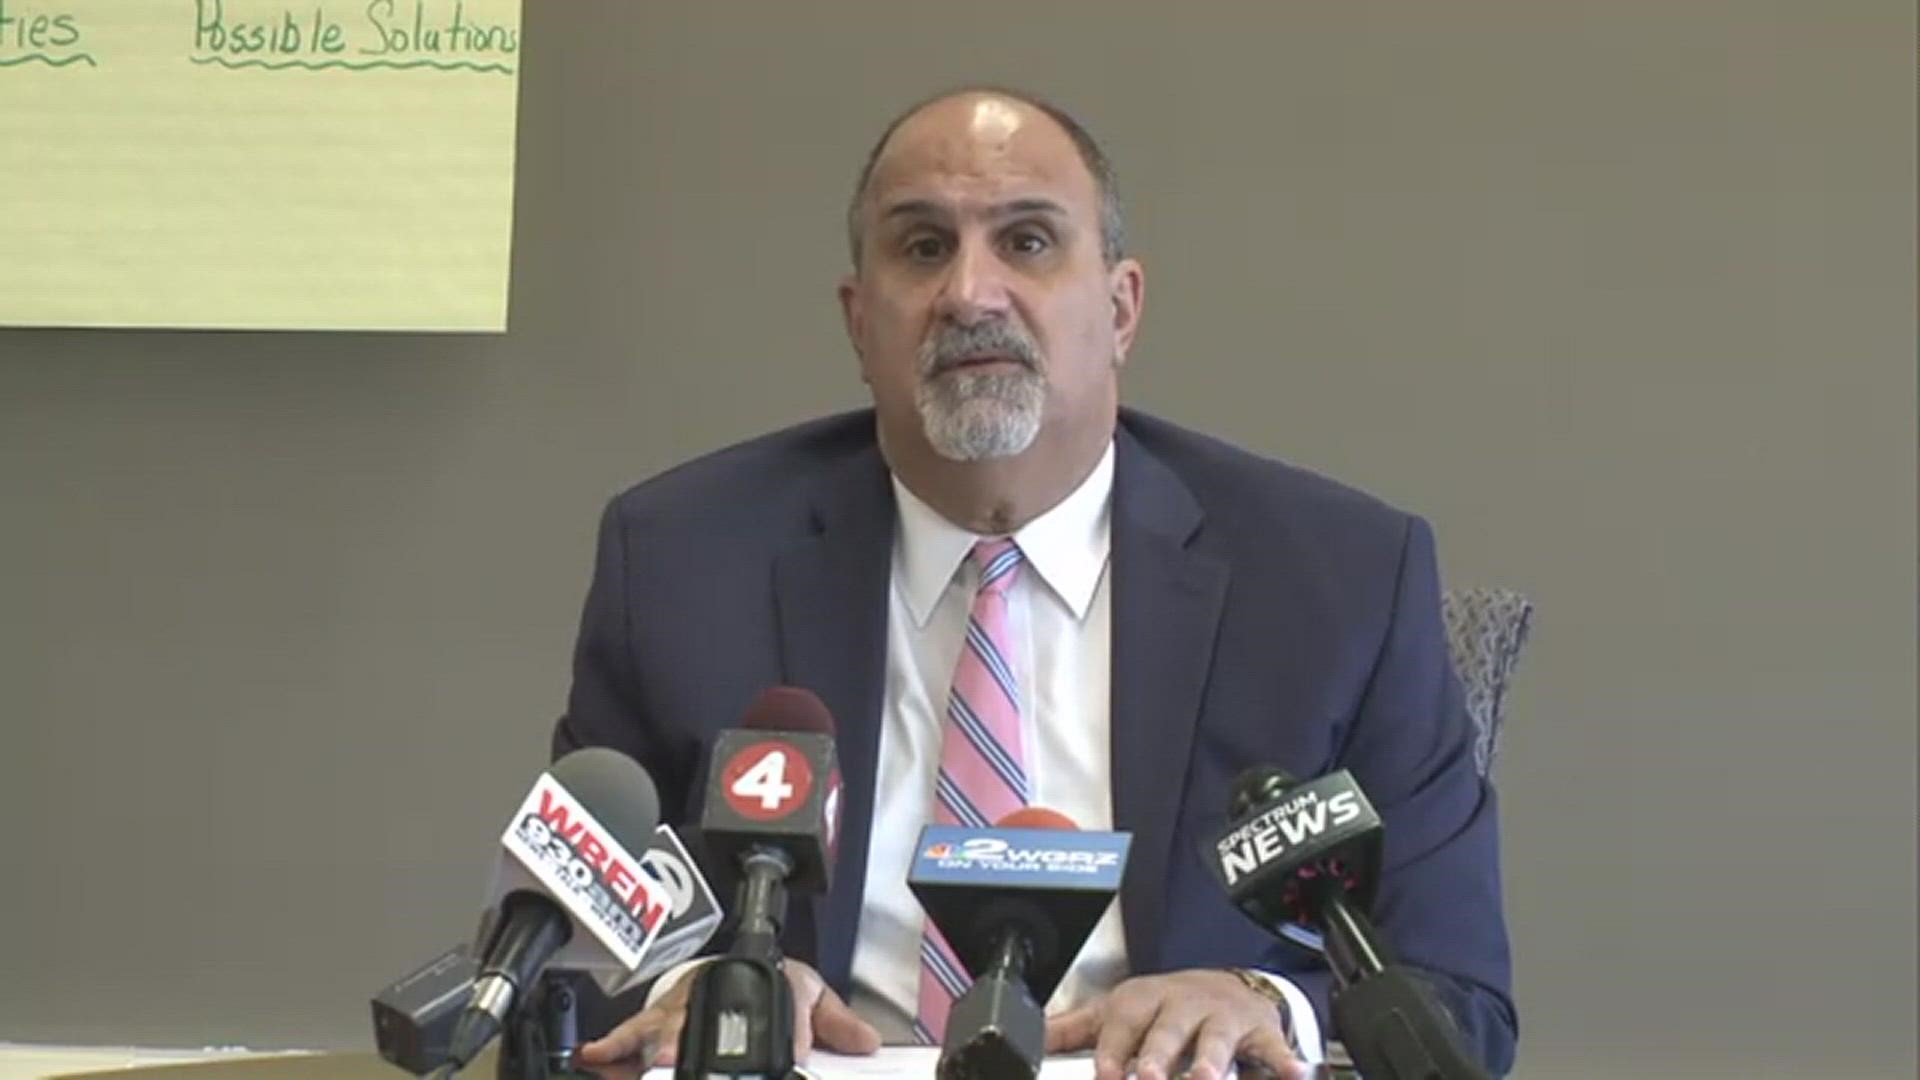 Niagara Falls Schools Superintendent discusses COVID-19 cases in the district.